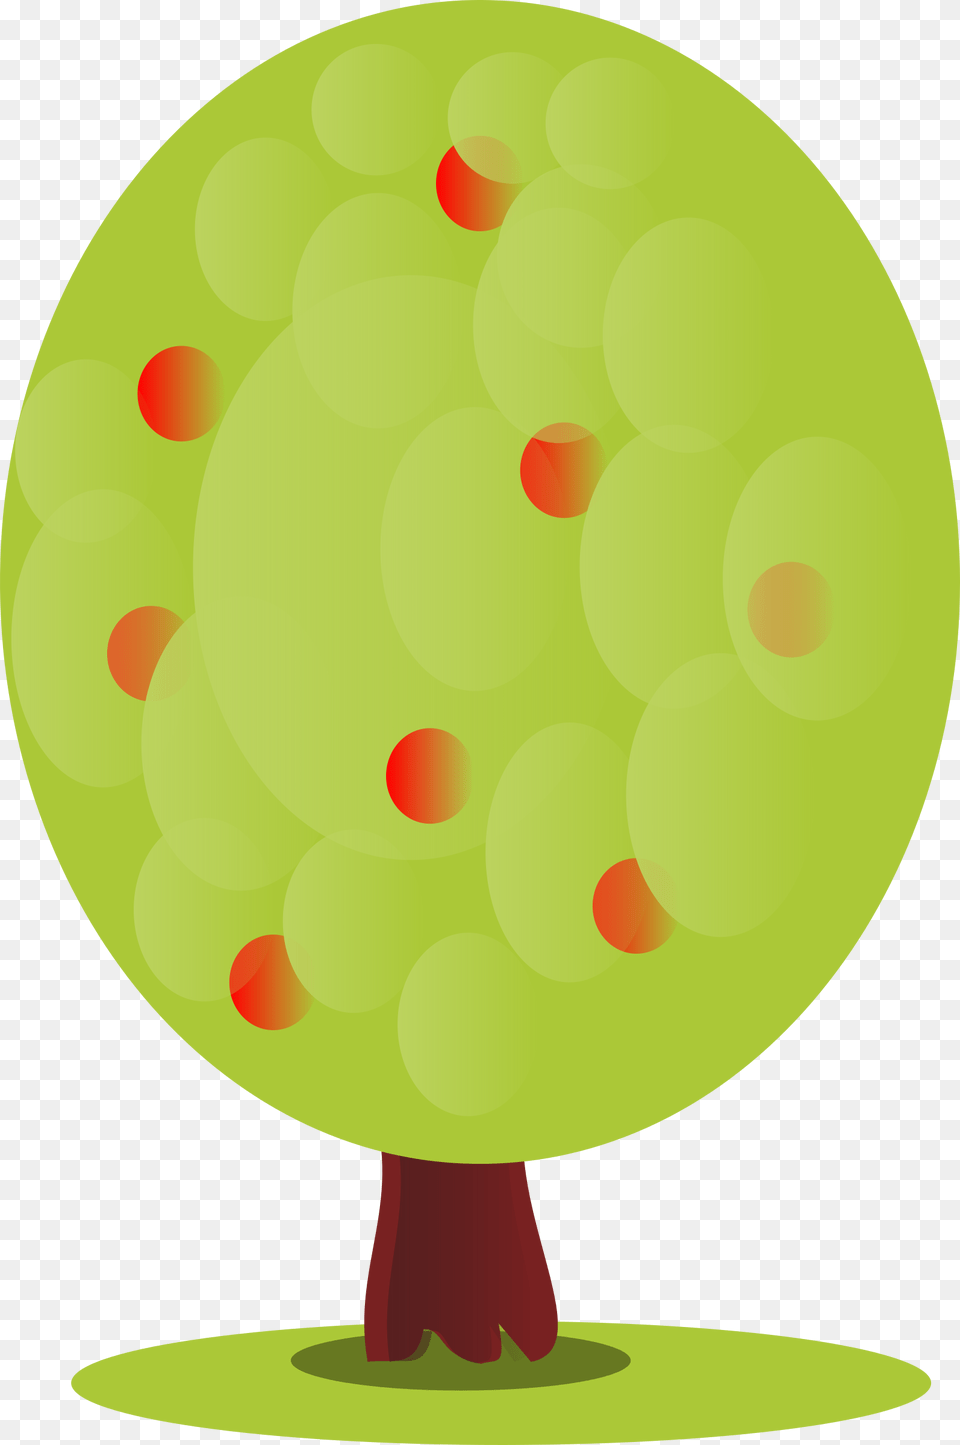 Red Fruit Tree Icons, Sphere, Astronomy, Moon, Nature Png